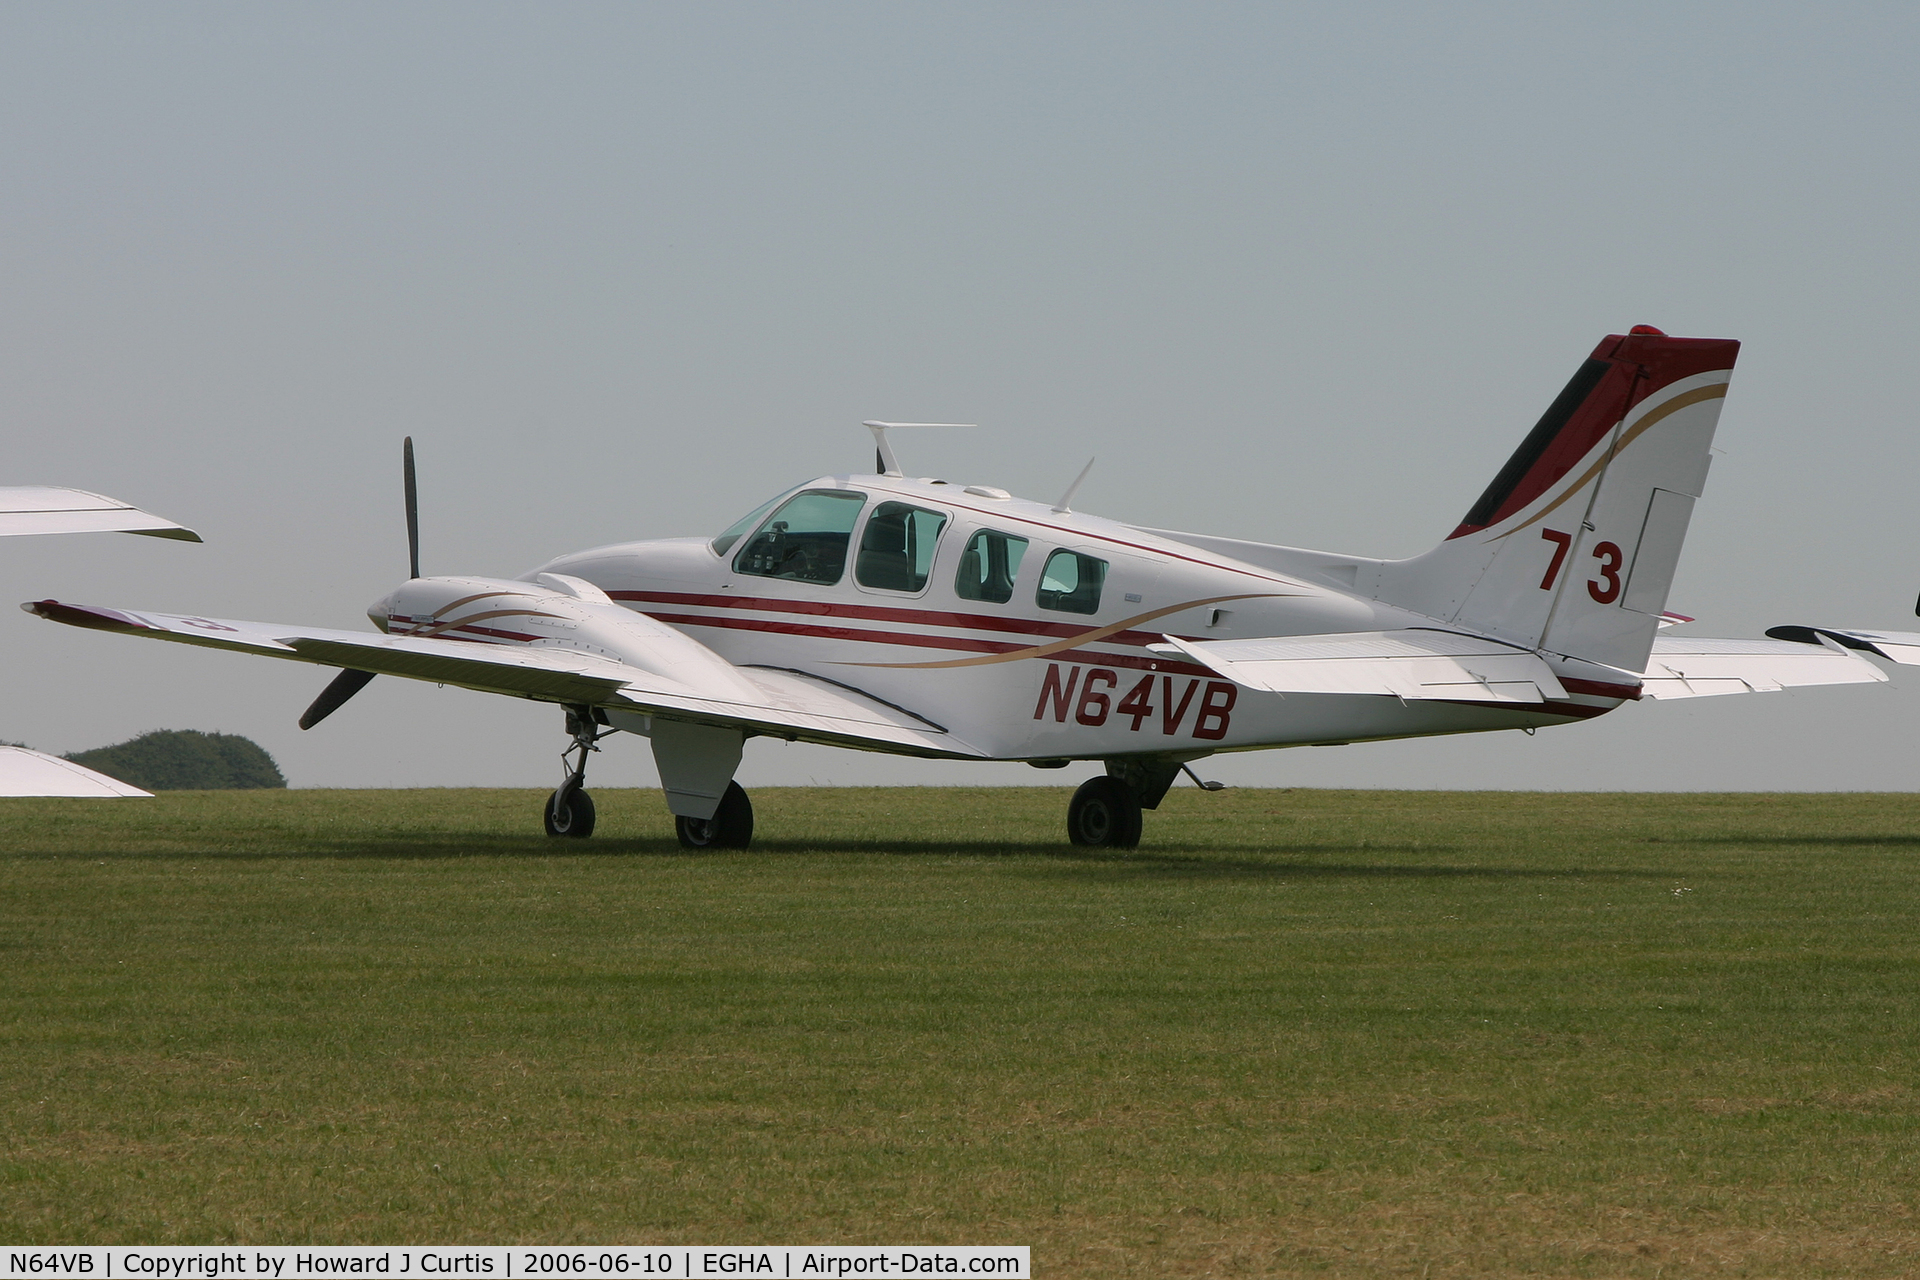 N64VB, 1973 Beech 58 Baron C/N TH-305, Race number 73, at the Dorset Air Races.